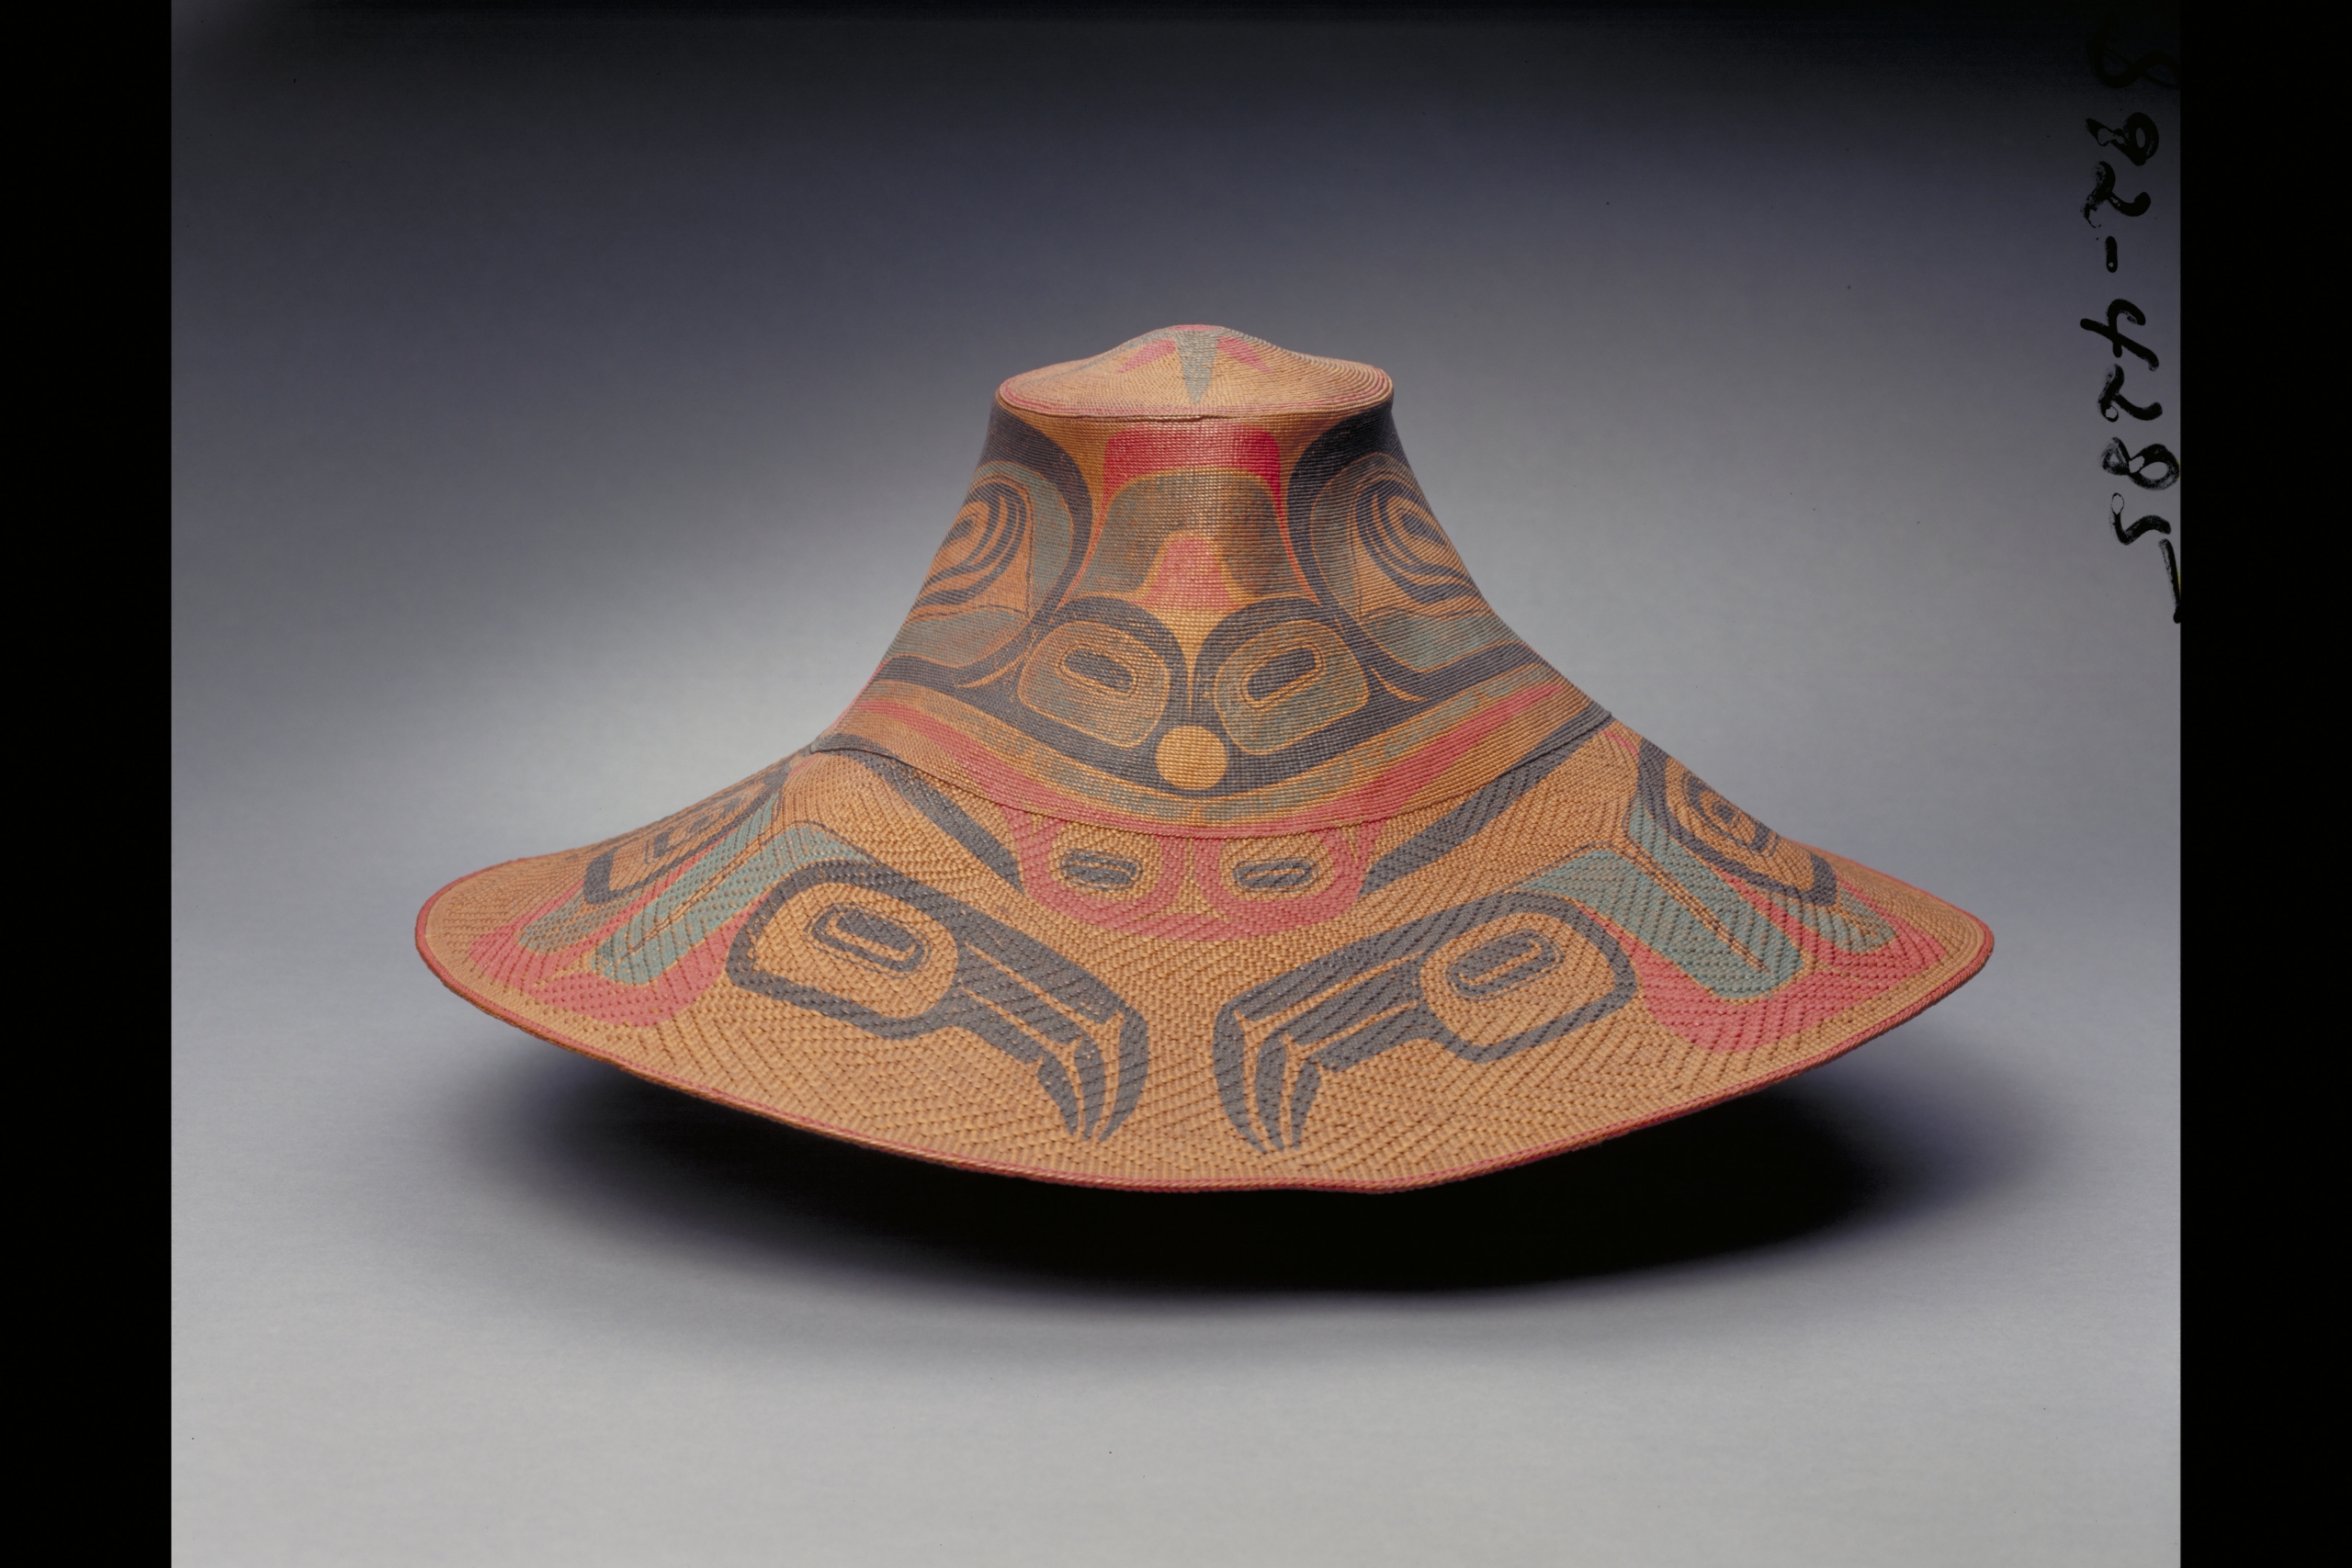 large hat woven of spruce roots with a formline animal design painted on